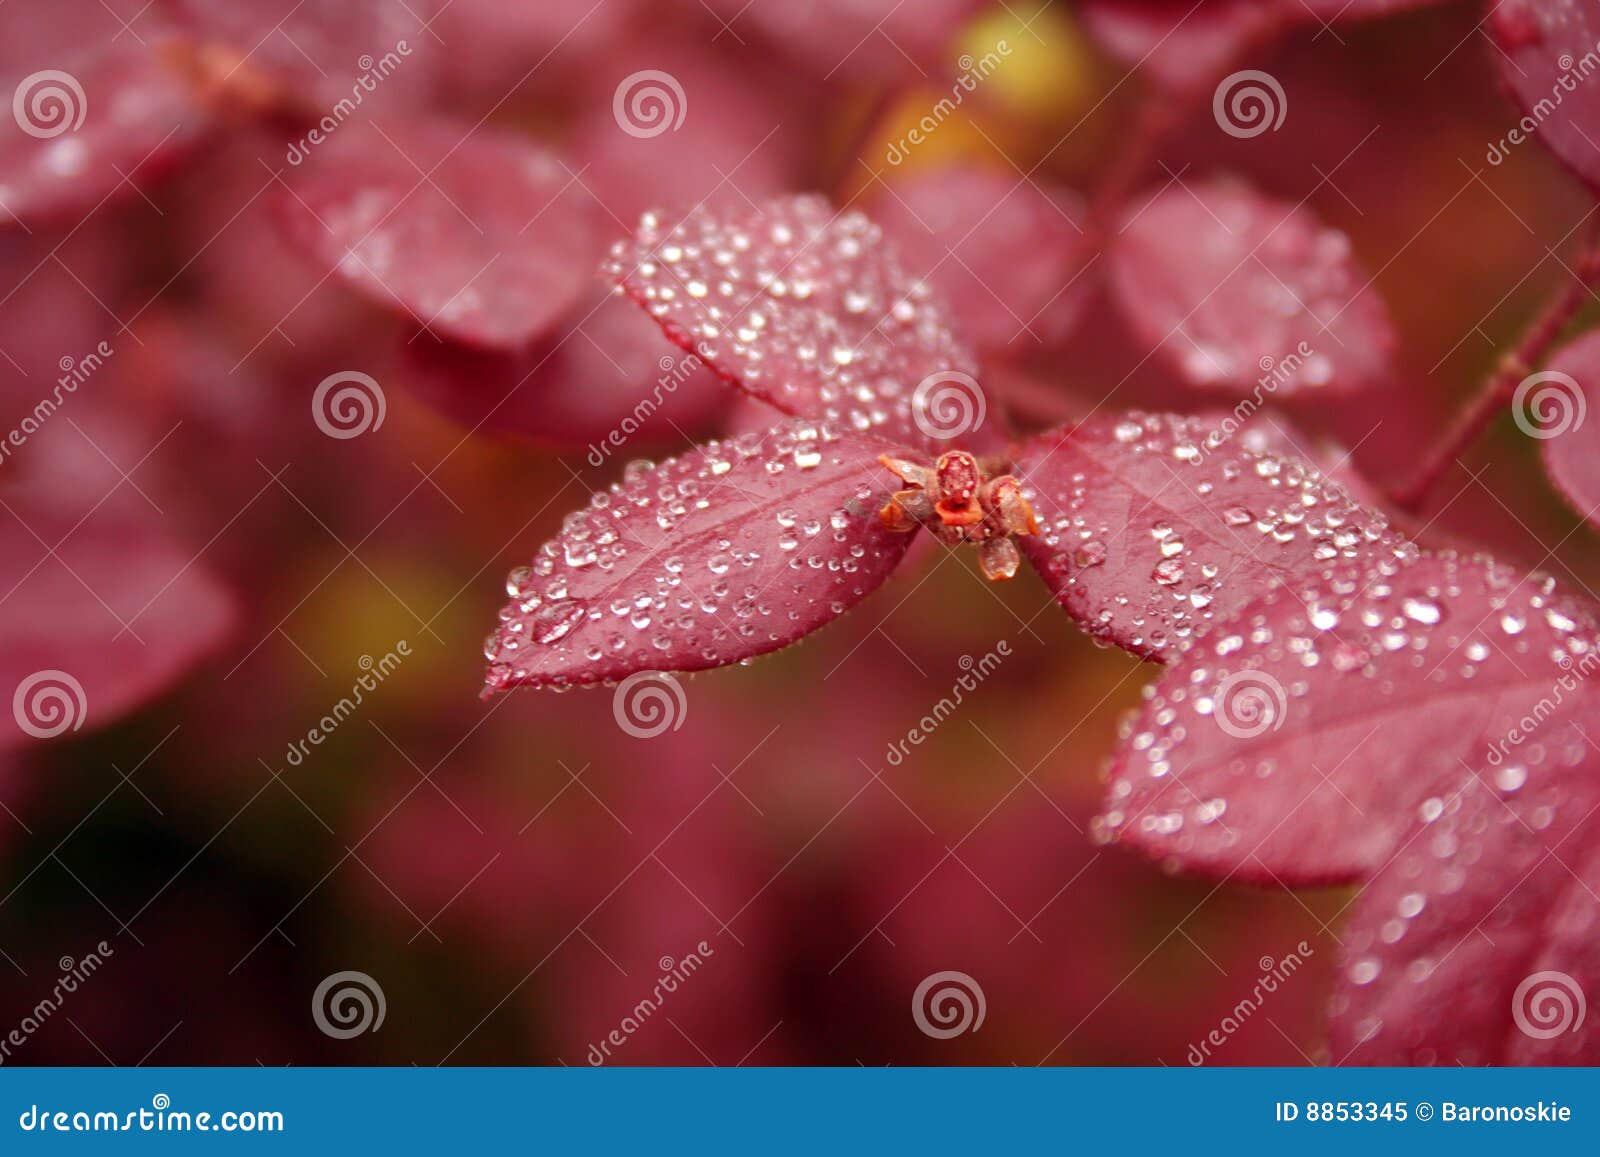 red leaves with water droplets